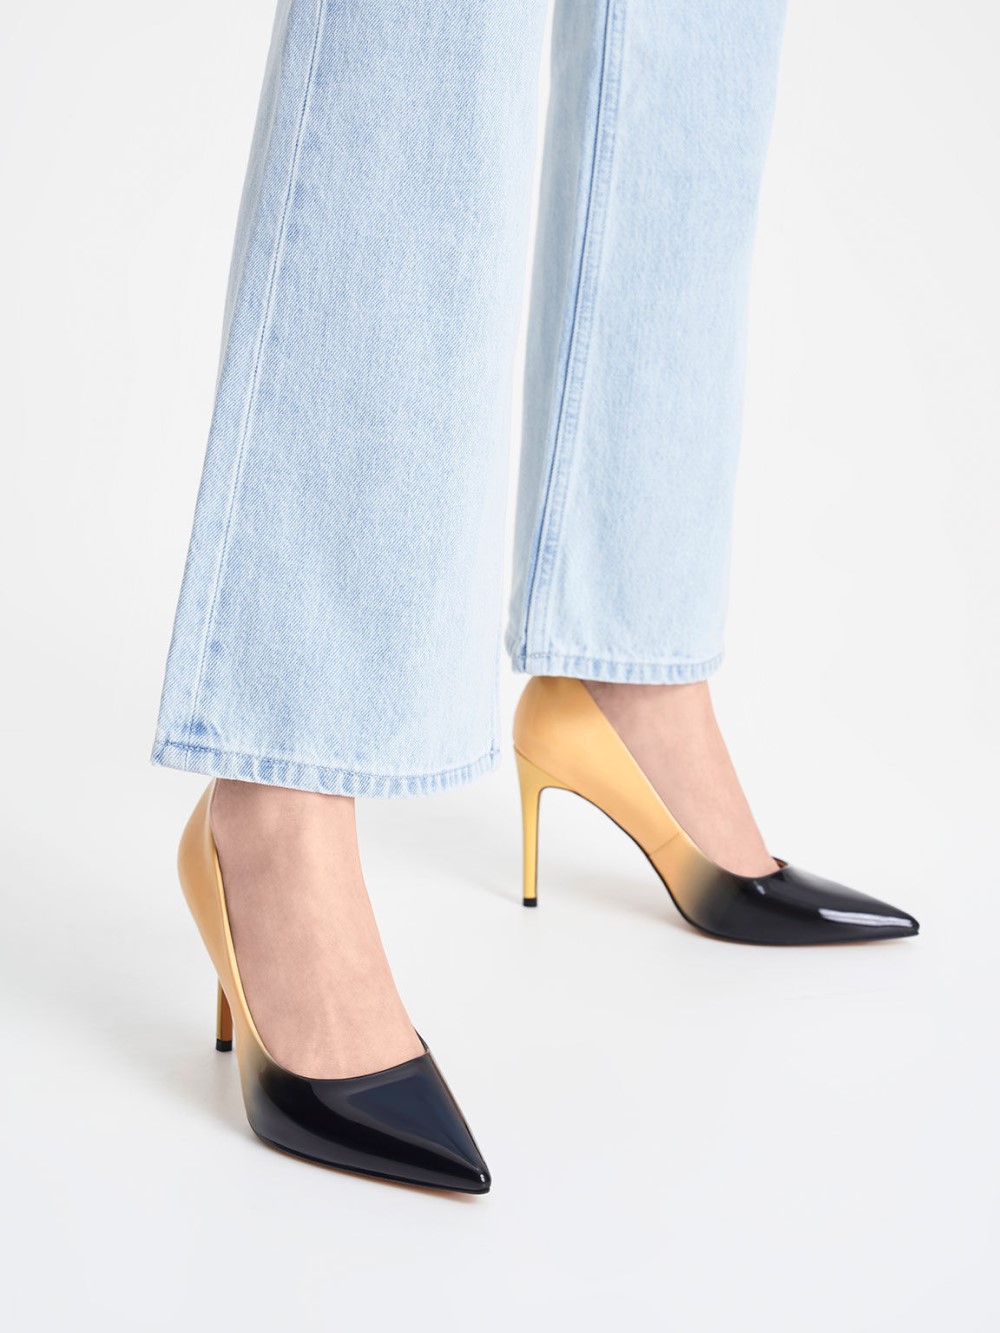 Two-Tone Stiletto Heel Pumps – Charles & Keith